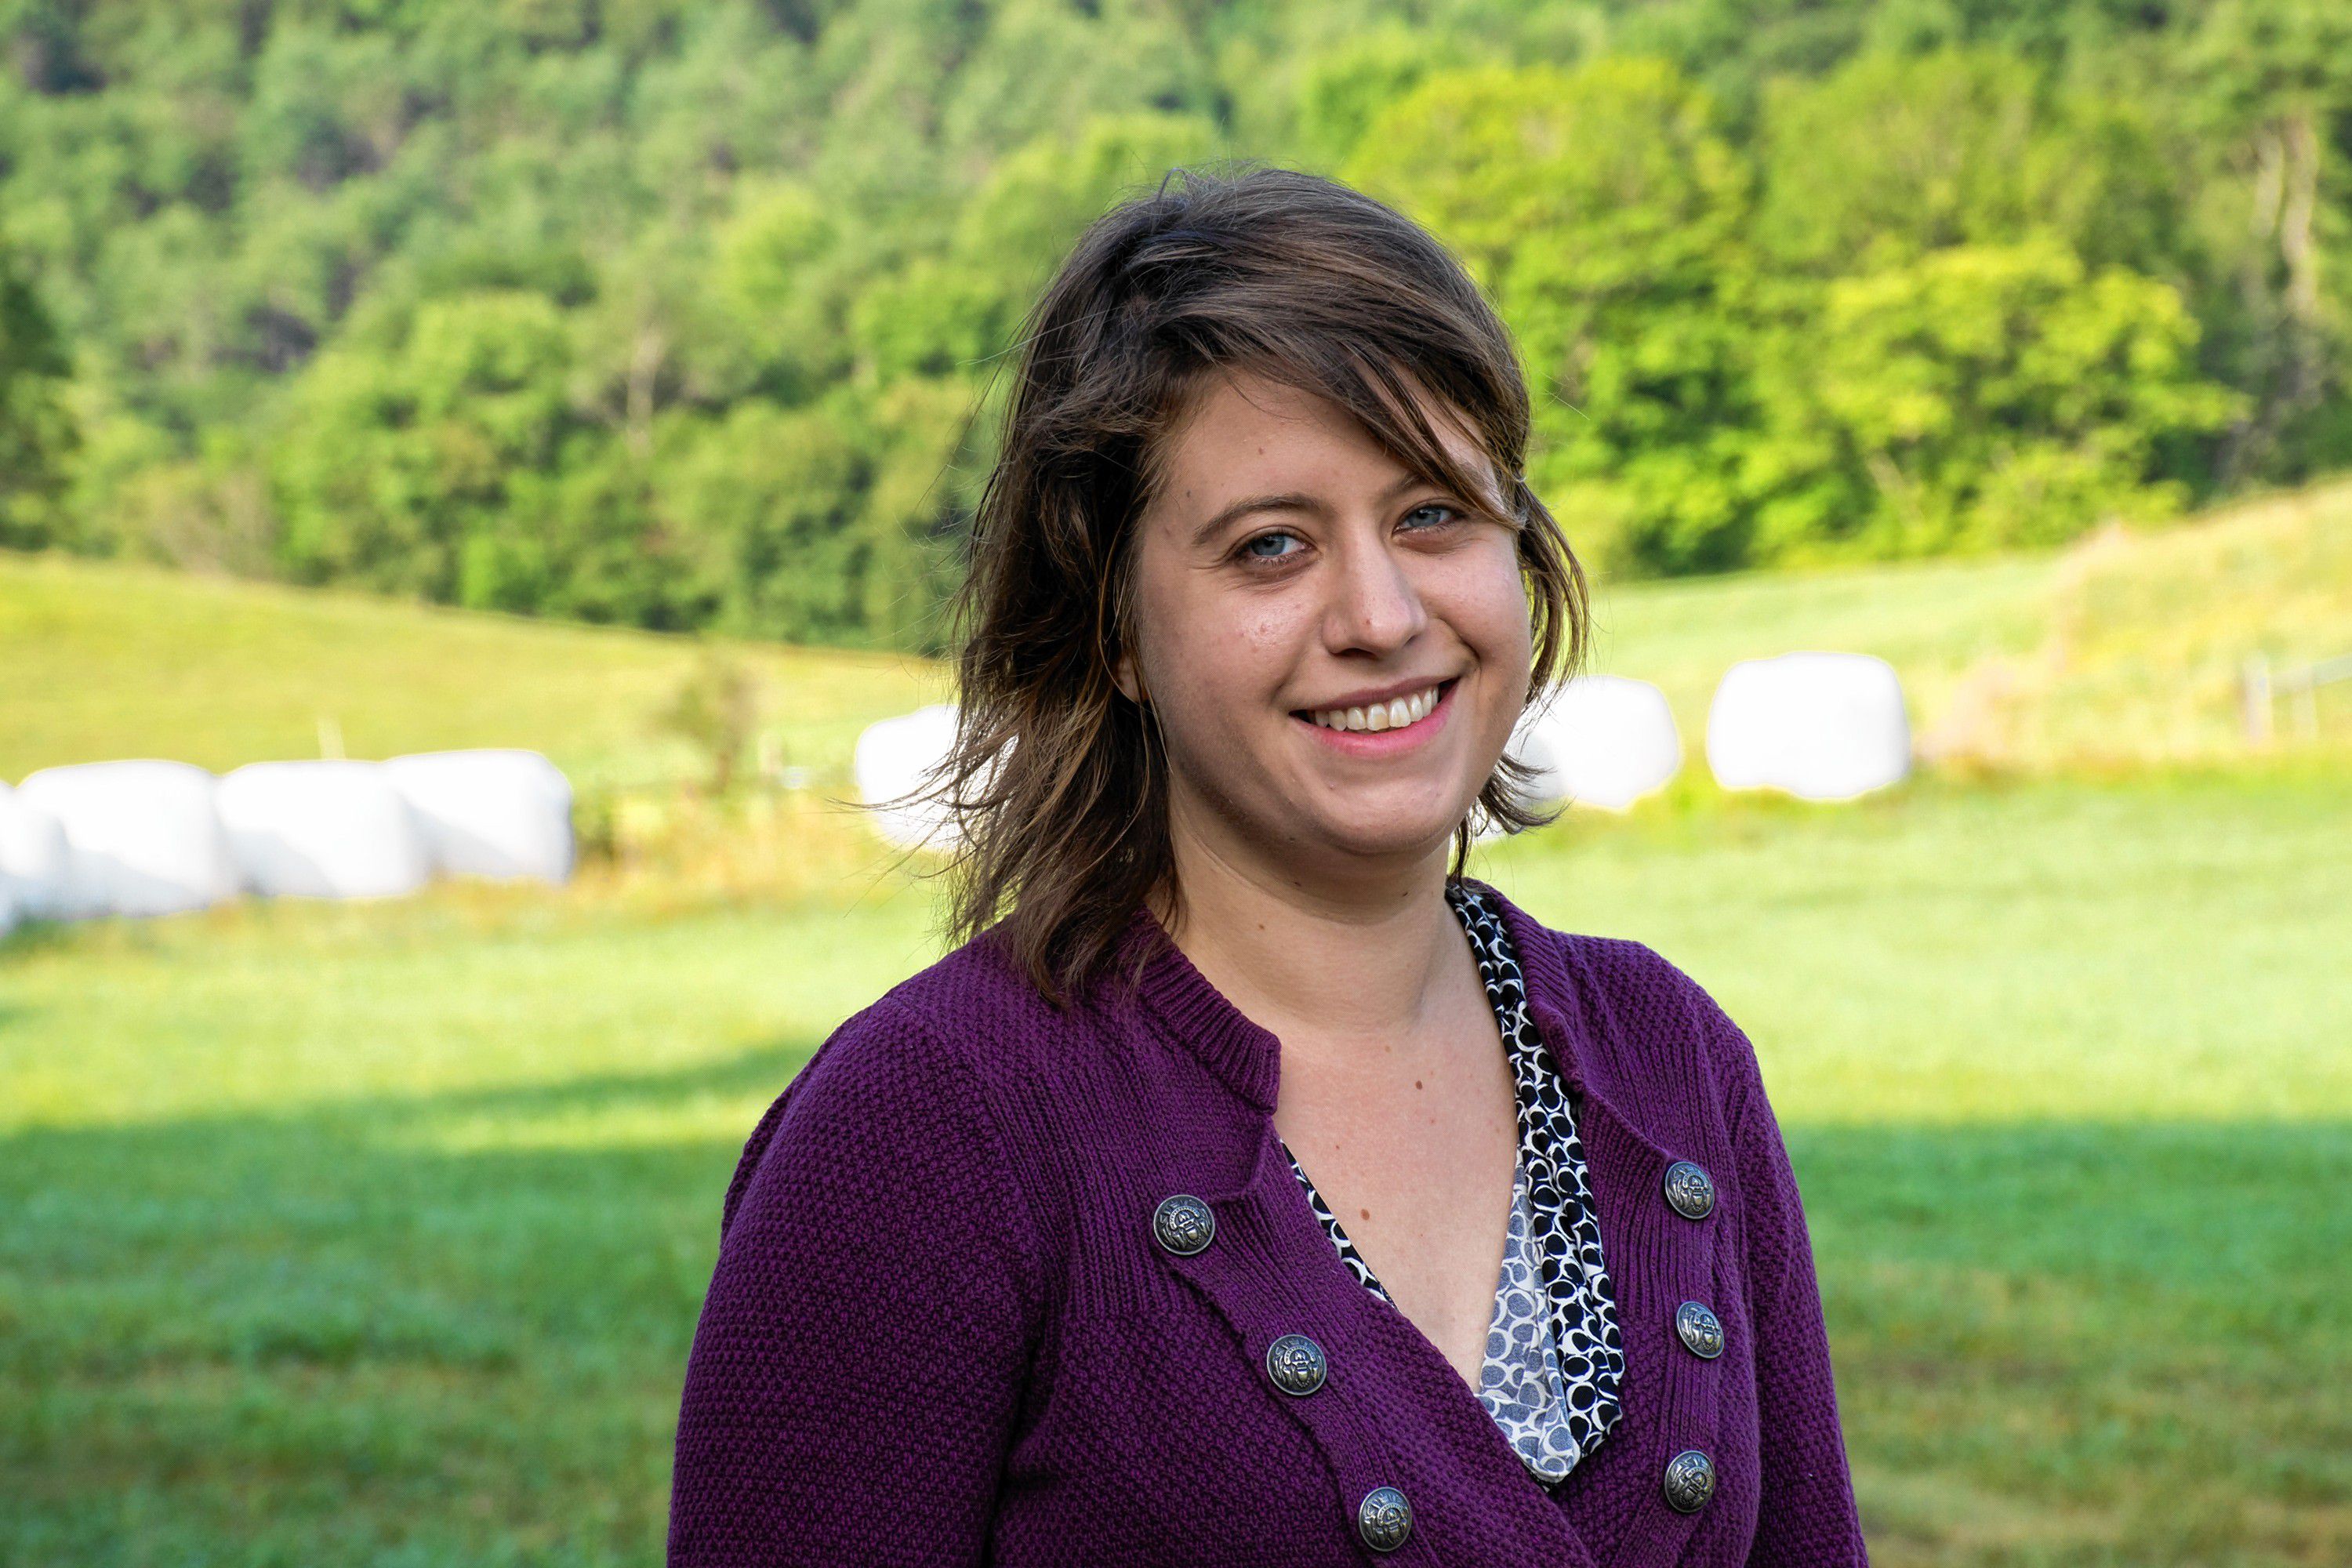 Sarah Danly, of Royalton, was hired in April as the network manager for Vermont's Farm to Plate food system plan. Danly grew up in Washington, D.C., and gradated from Vermont Law School in 2015 with a master's degree in land use law. She combined her personal interest in whole food with her degree and moved to back Vermont from Boston. (Nancy Nutile-McMenemy photograph)